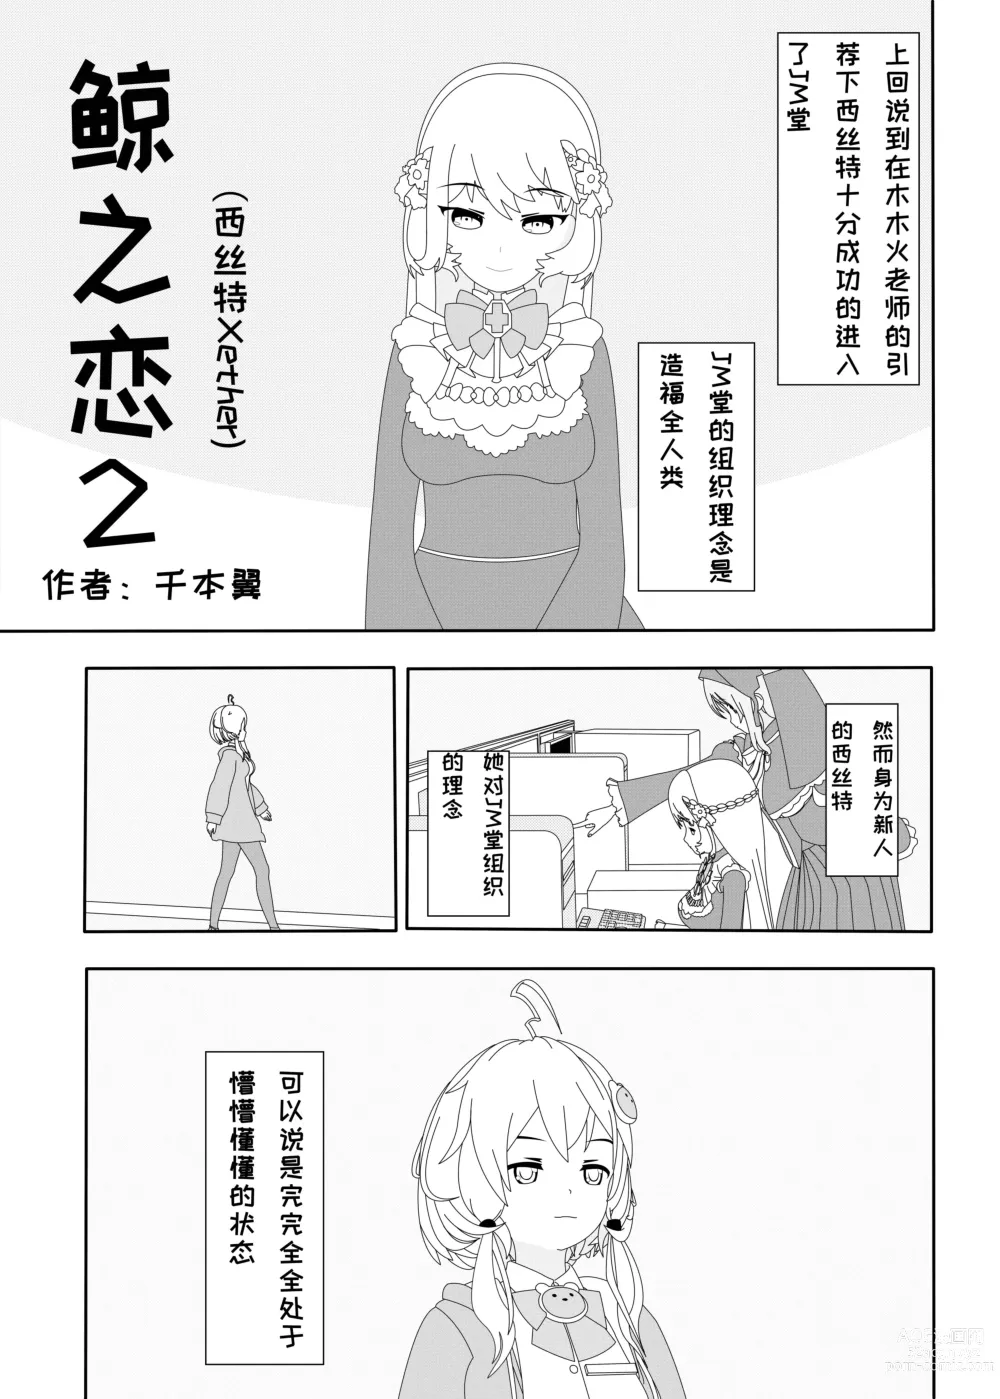 Page 1 of doujinshi 鲸之恋2（西丝特Xether）